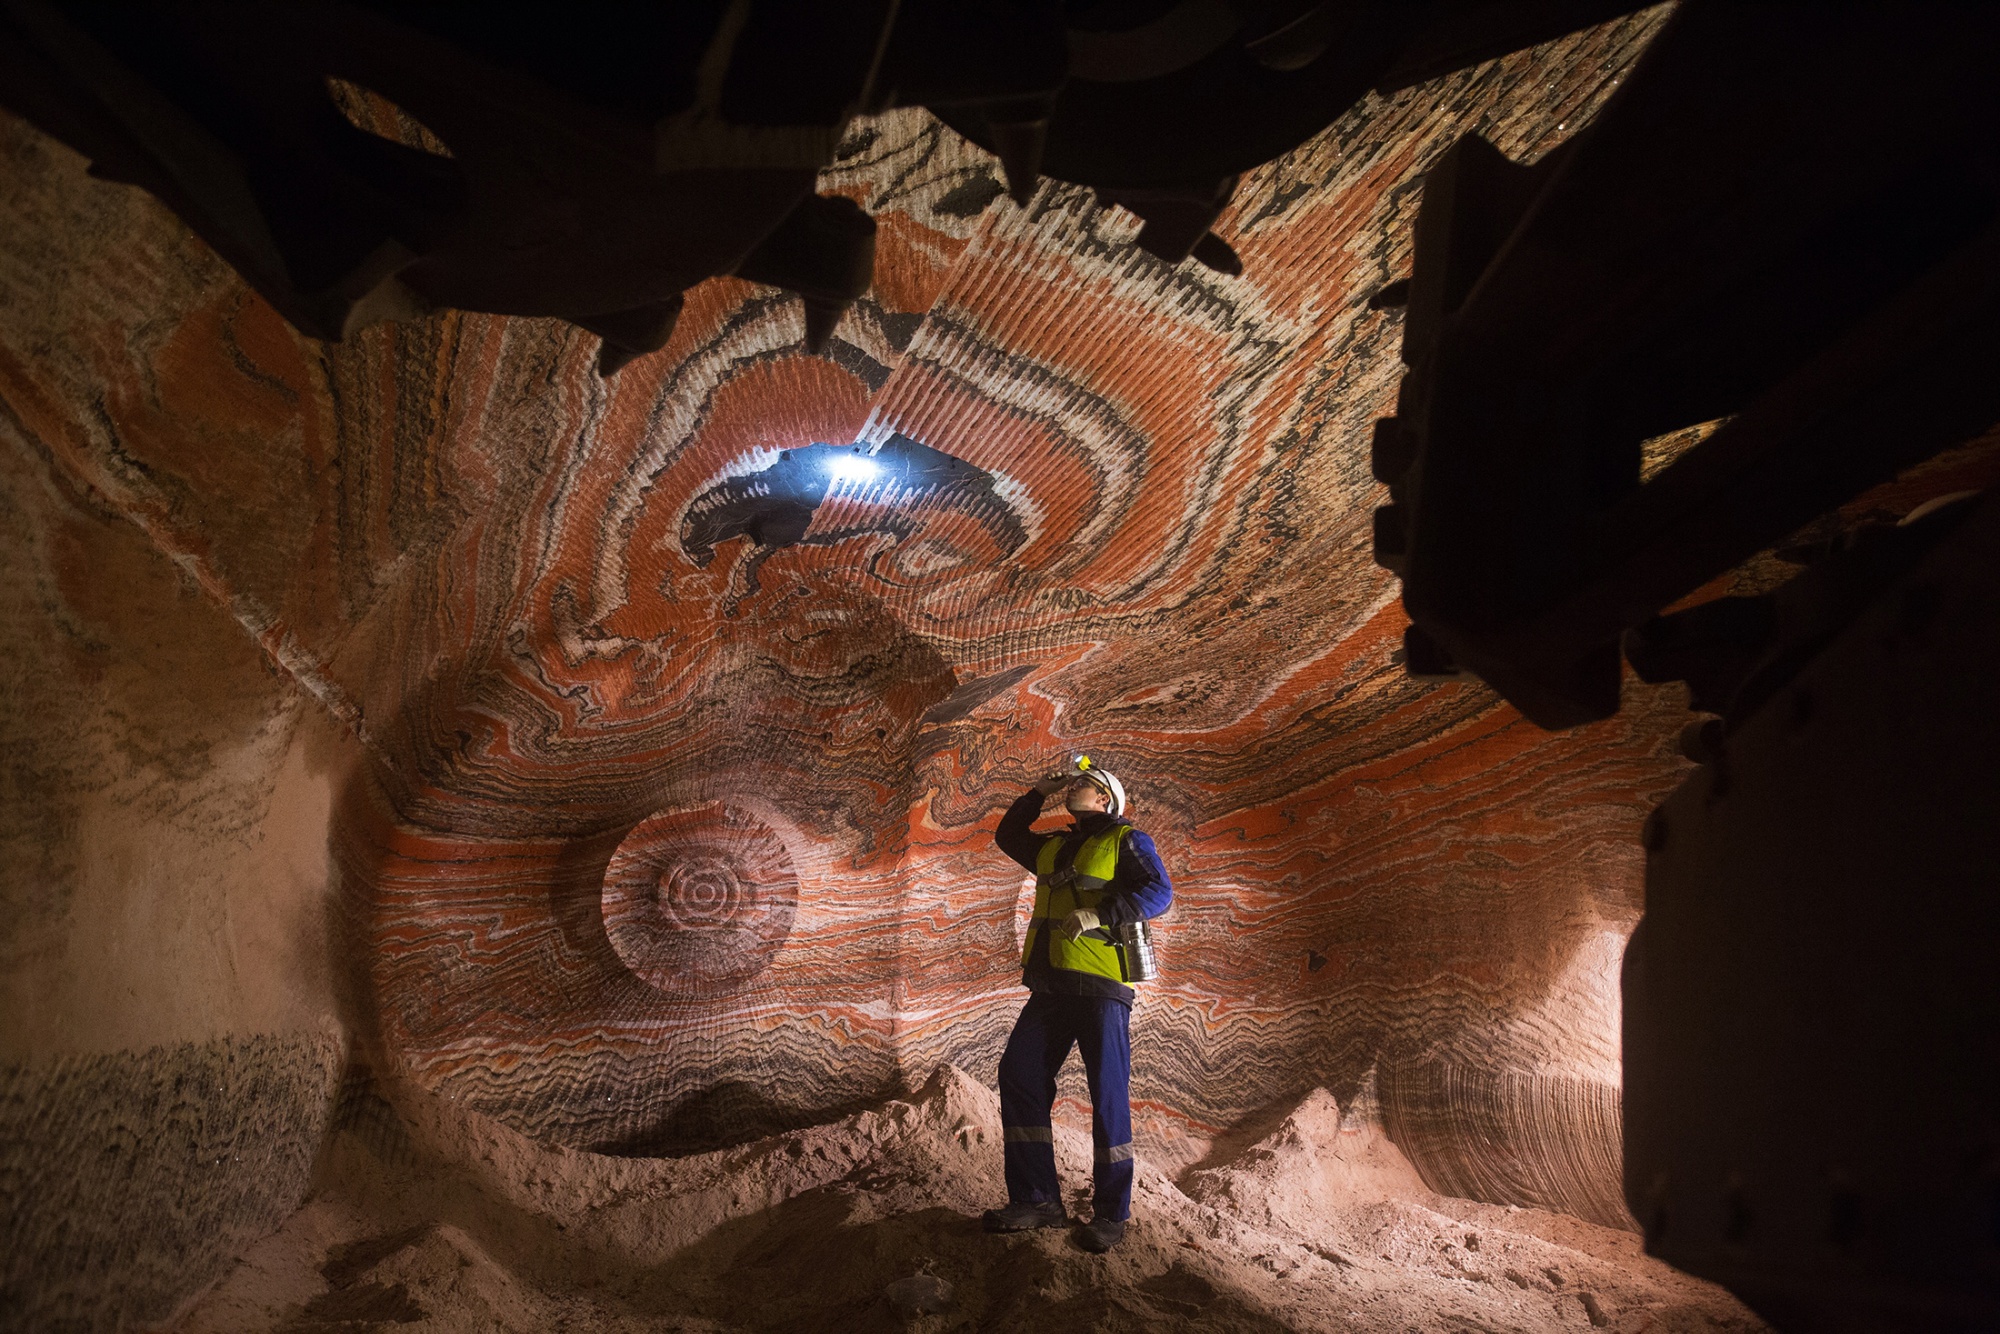 Measuring the concentration of harmful gases in an underground potash mine at the Usolskiy Potash Complex in the Perm region of Russia in 2017.